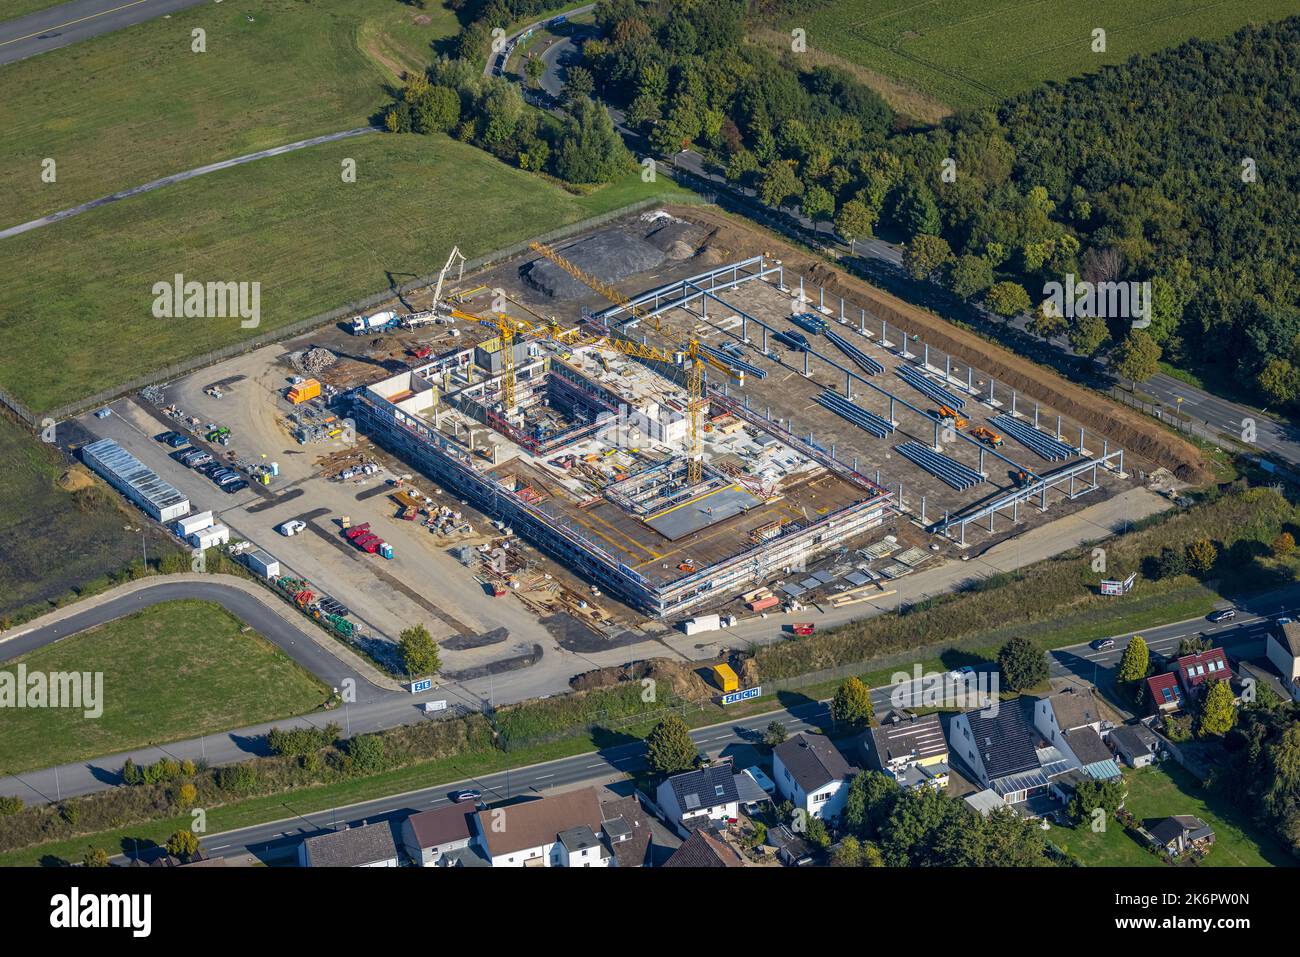 Aerial view, construction site for a new police building, Flughafenring corner Zeche-Norm-Straße, former parking lot P3, Dortmund Airport, Wickede, Do Stock Photo